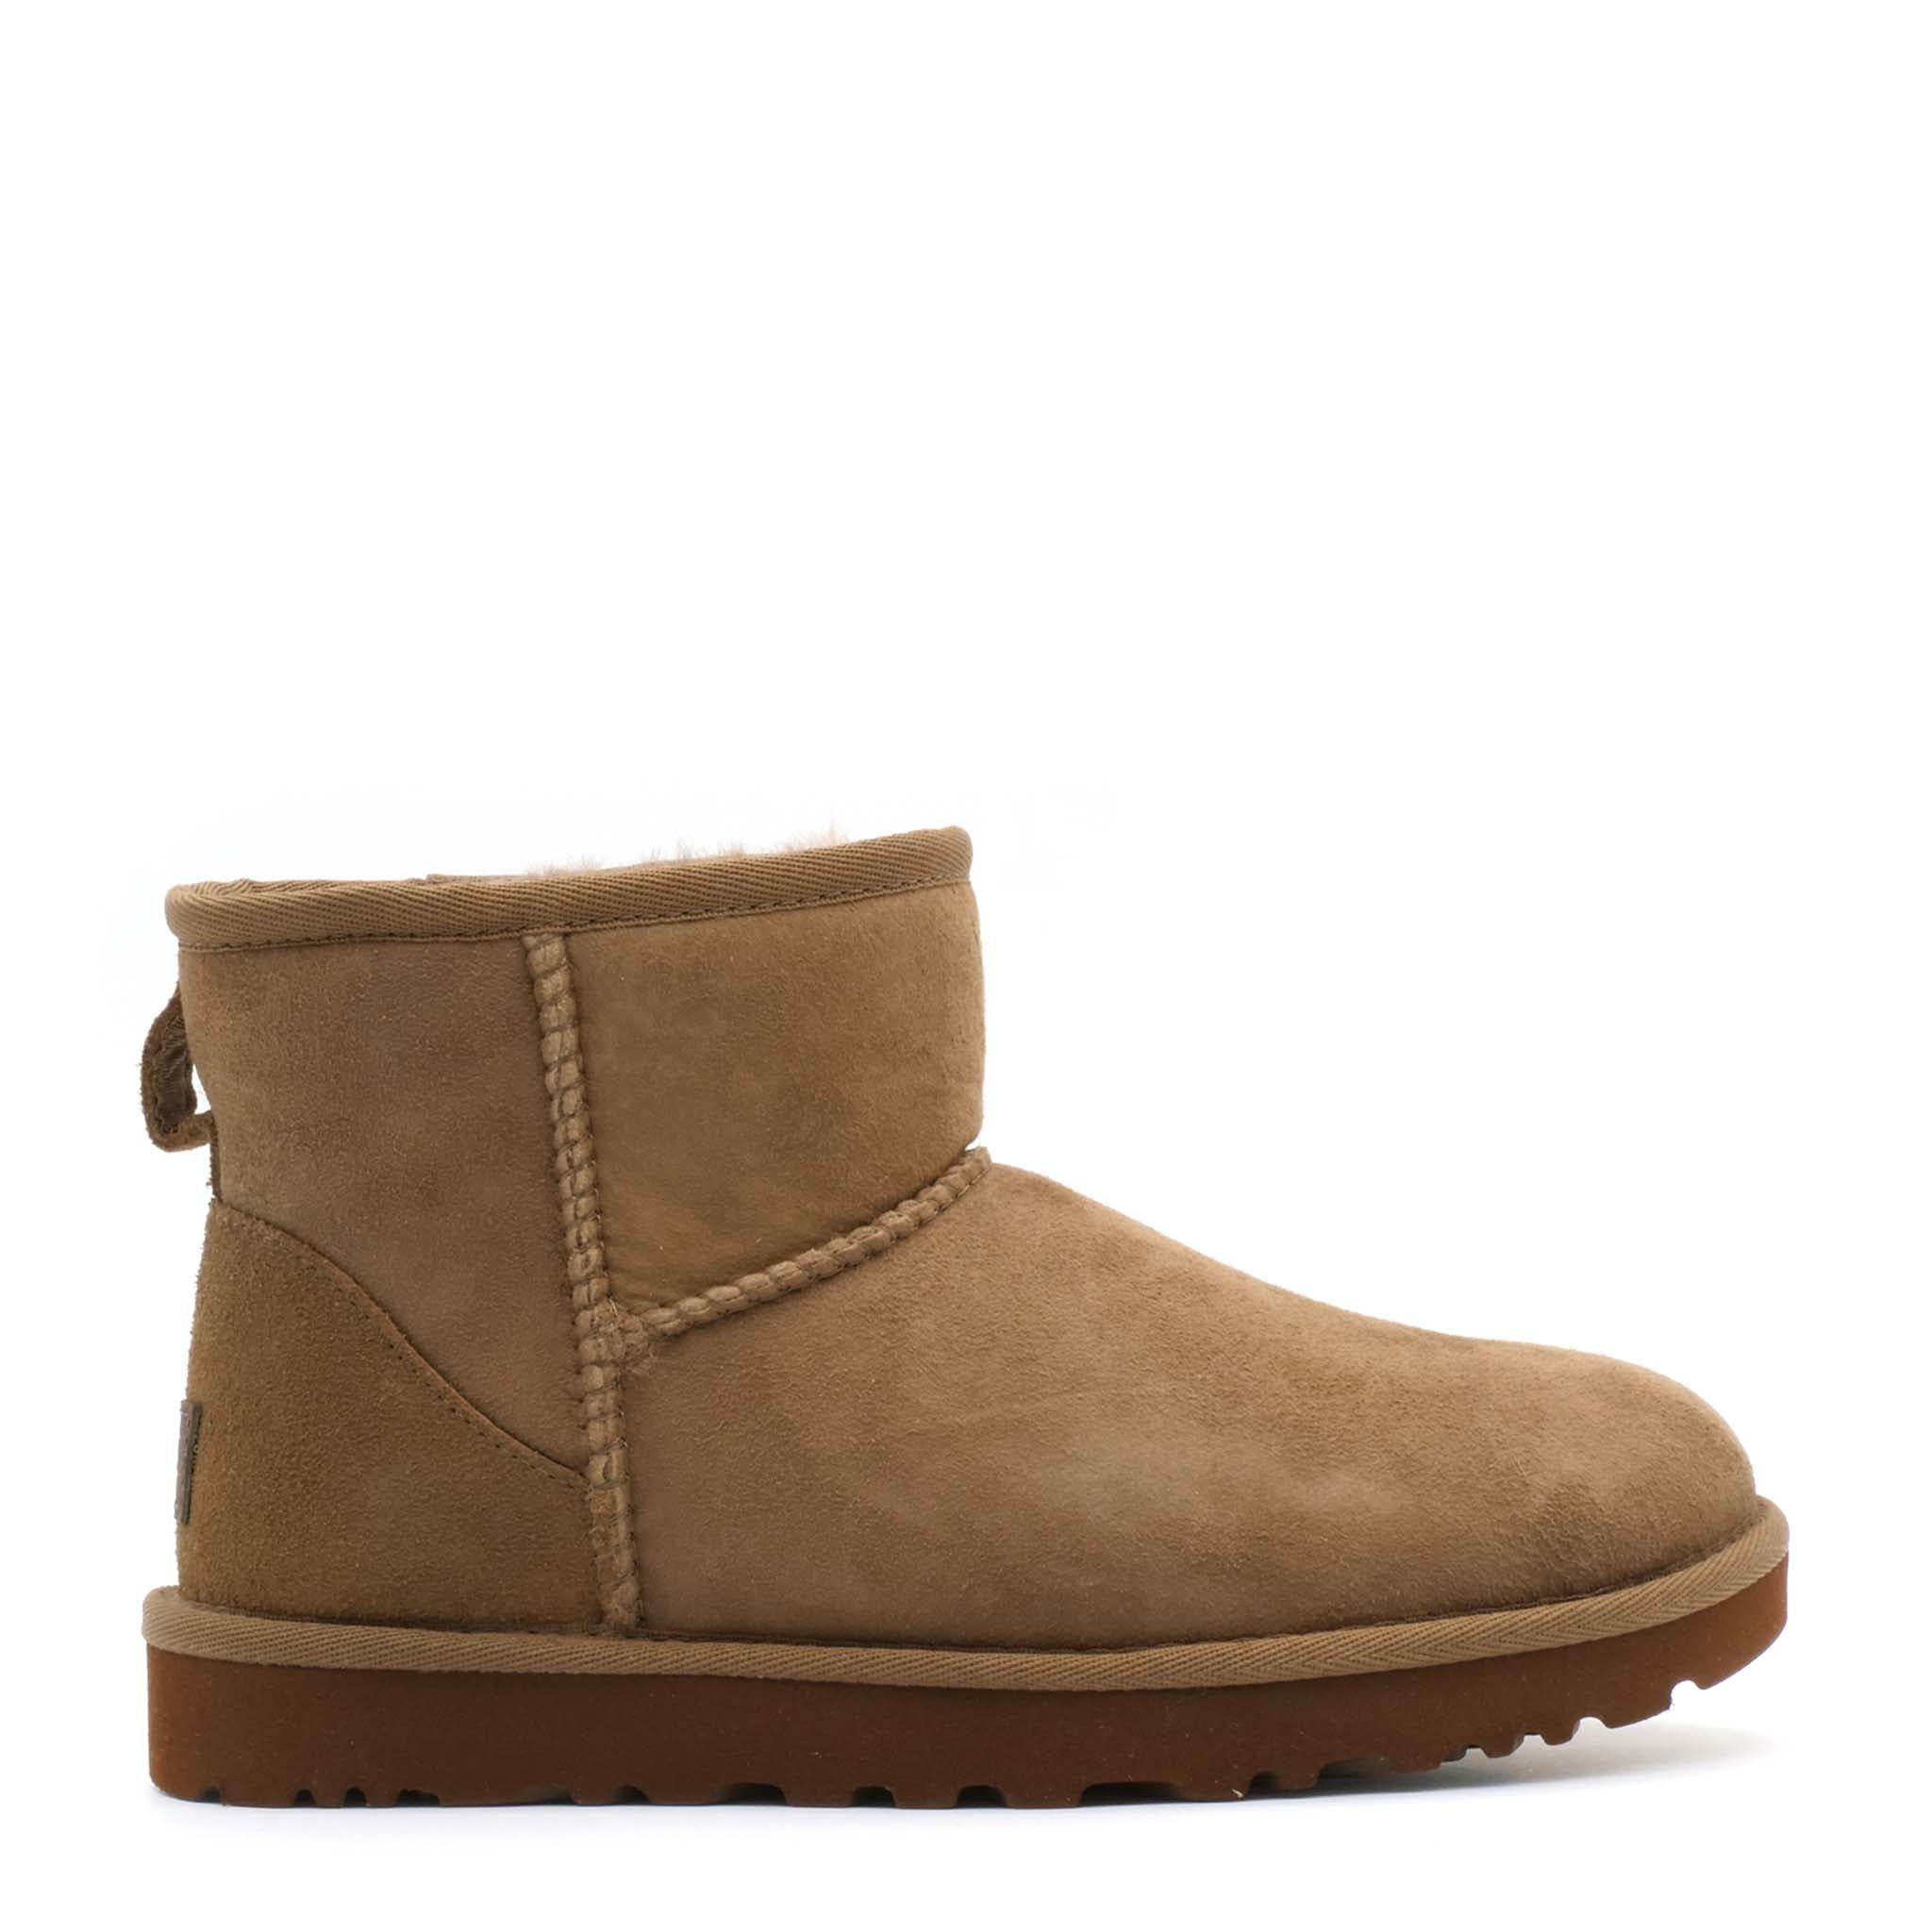 UGG W CLASSIC MINI ankle boot - Hickory price online